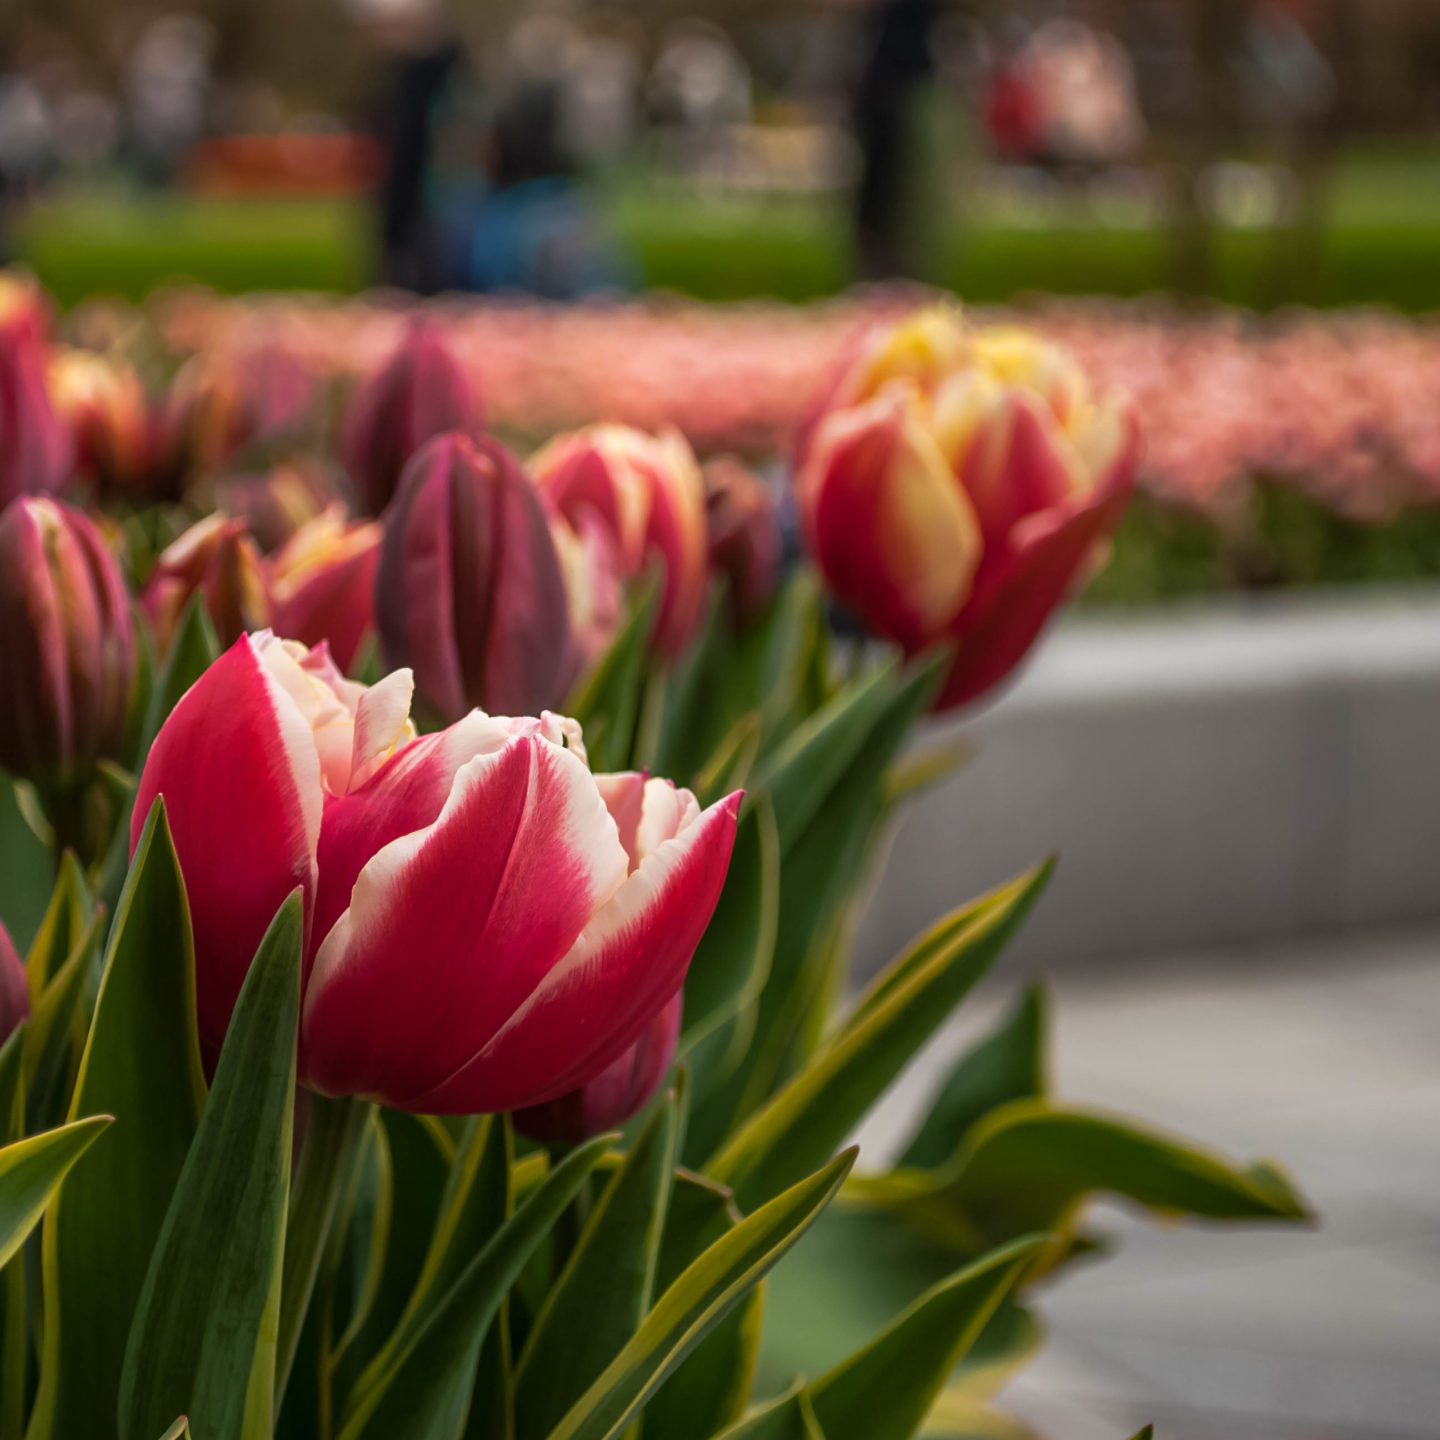 I think these were possibly my favourite tulips at Keukenhof